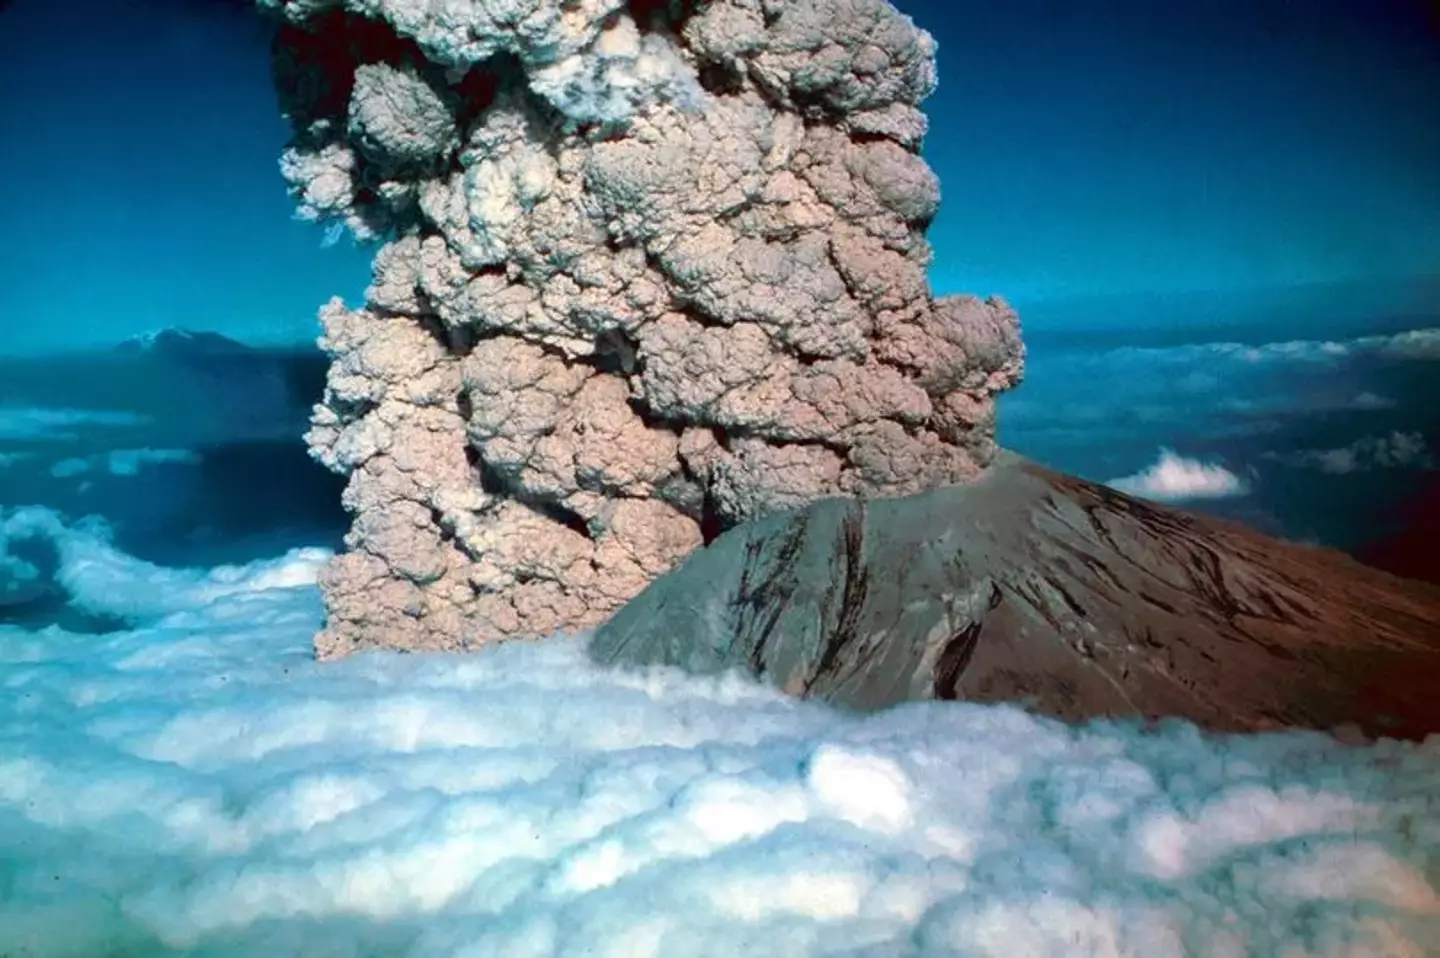 The 1980 eruption of Mount St Helens remains the deadliest and most economically destructive volcanic event in US history. (Universal Images Group via Getty Images)